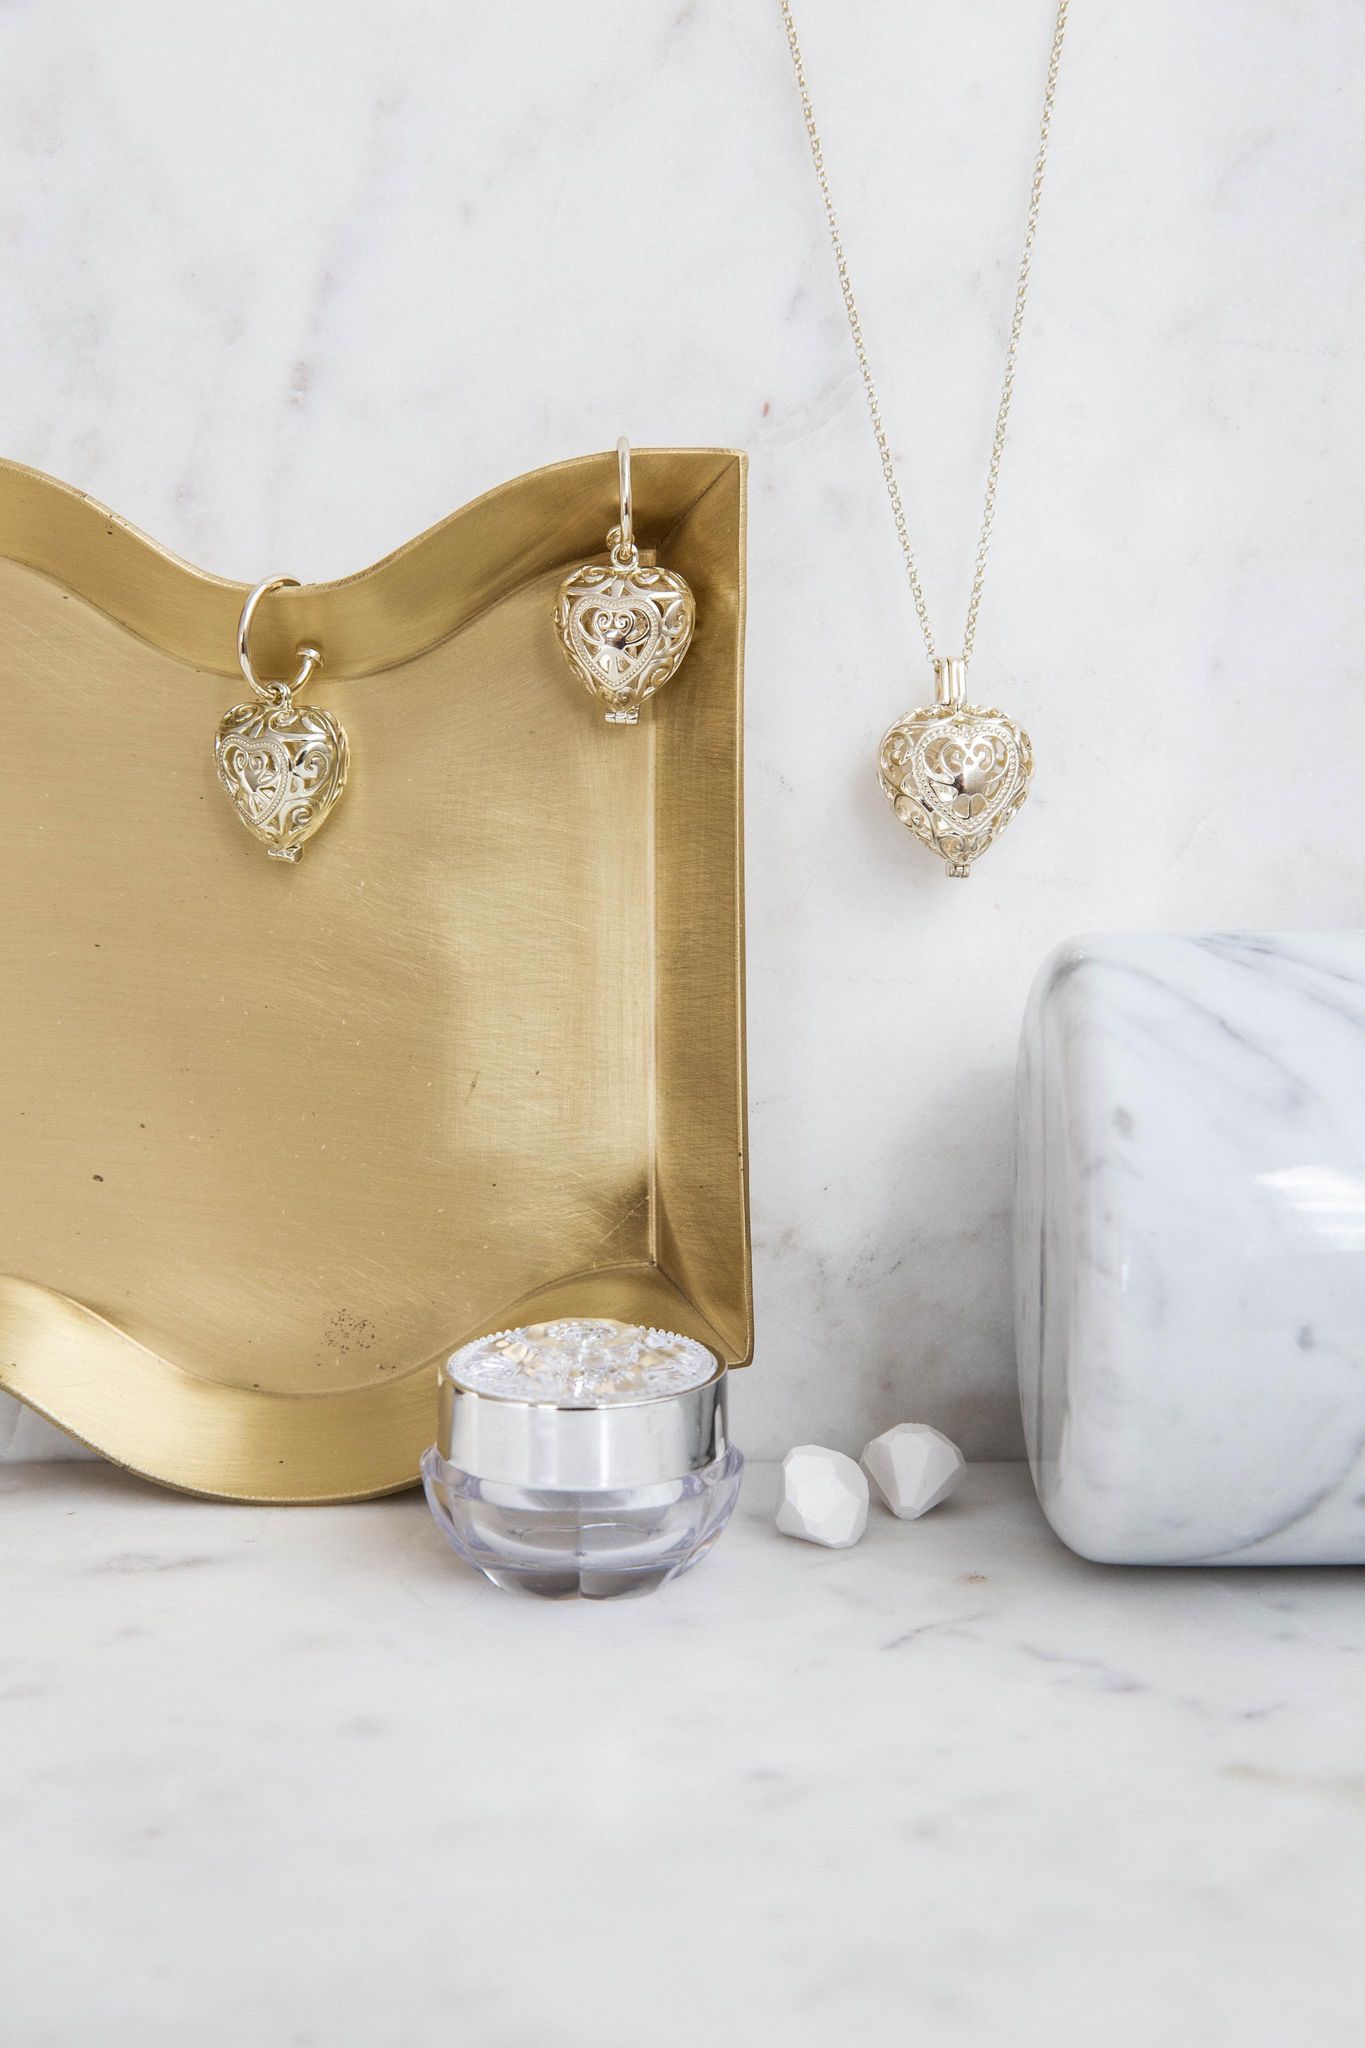 Load image into Gallery viewer, Passion Gold Necklace and Earring Bundle
